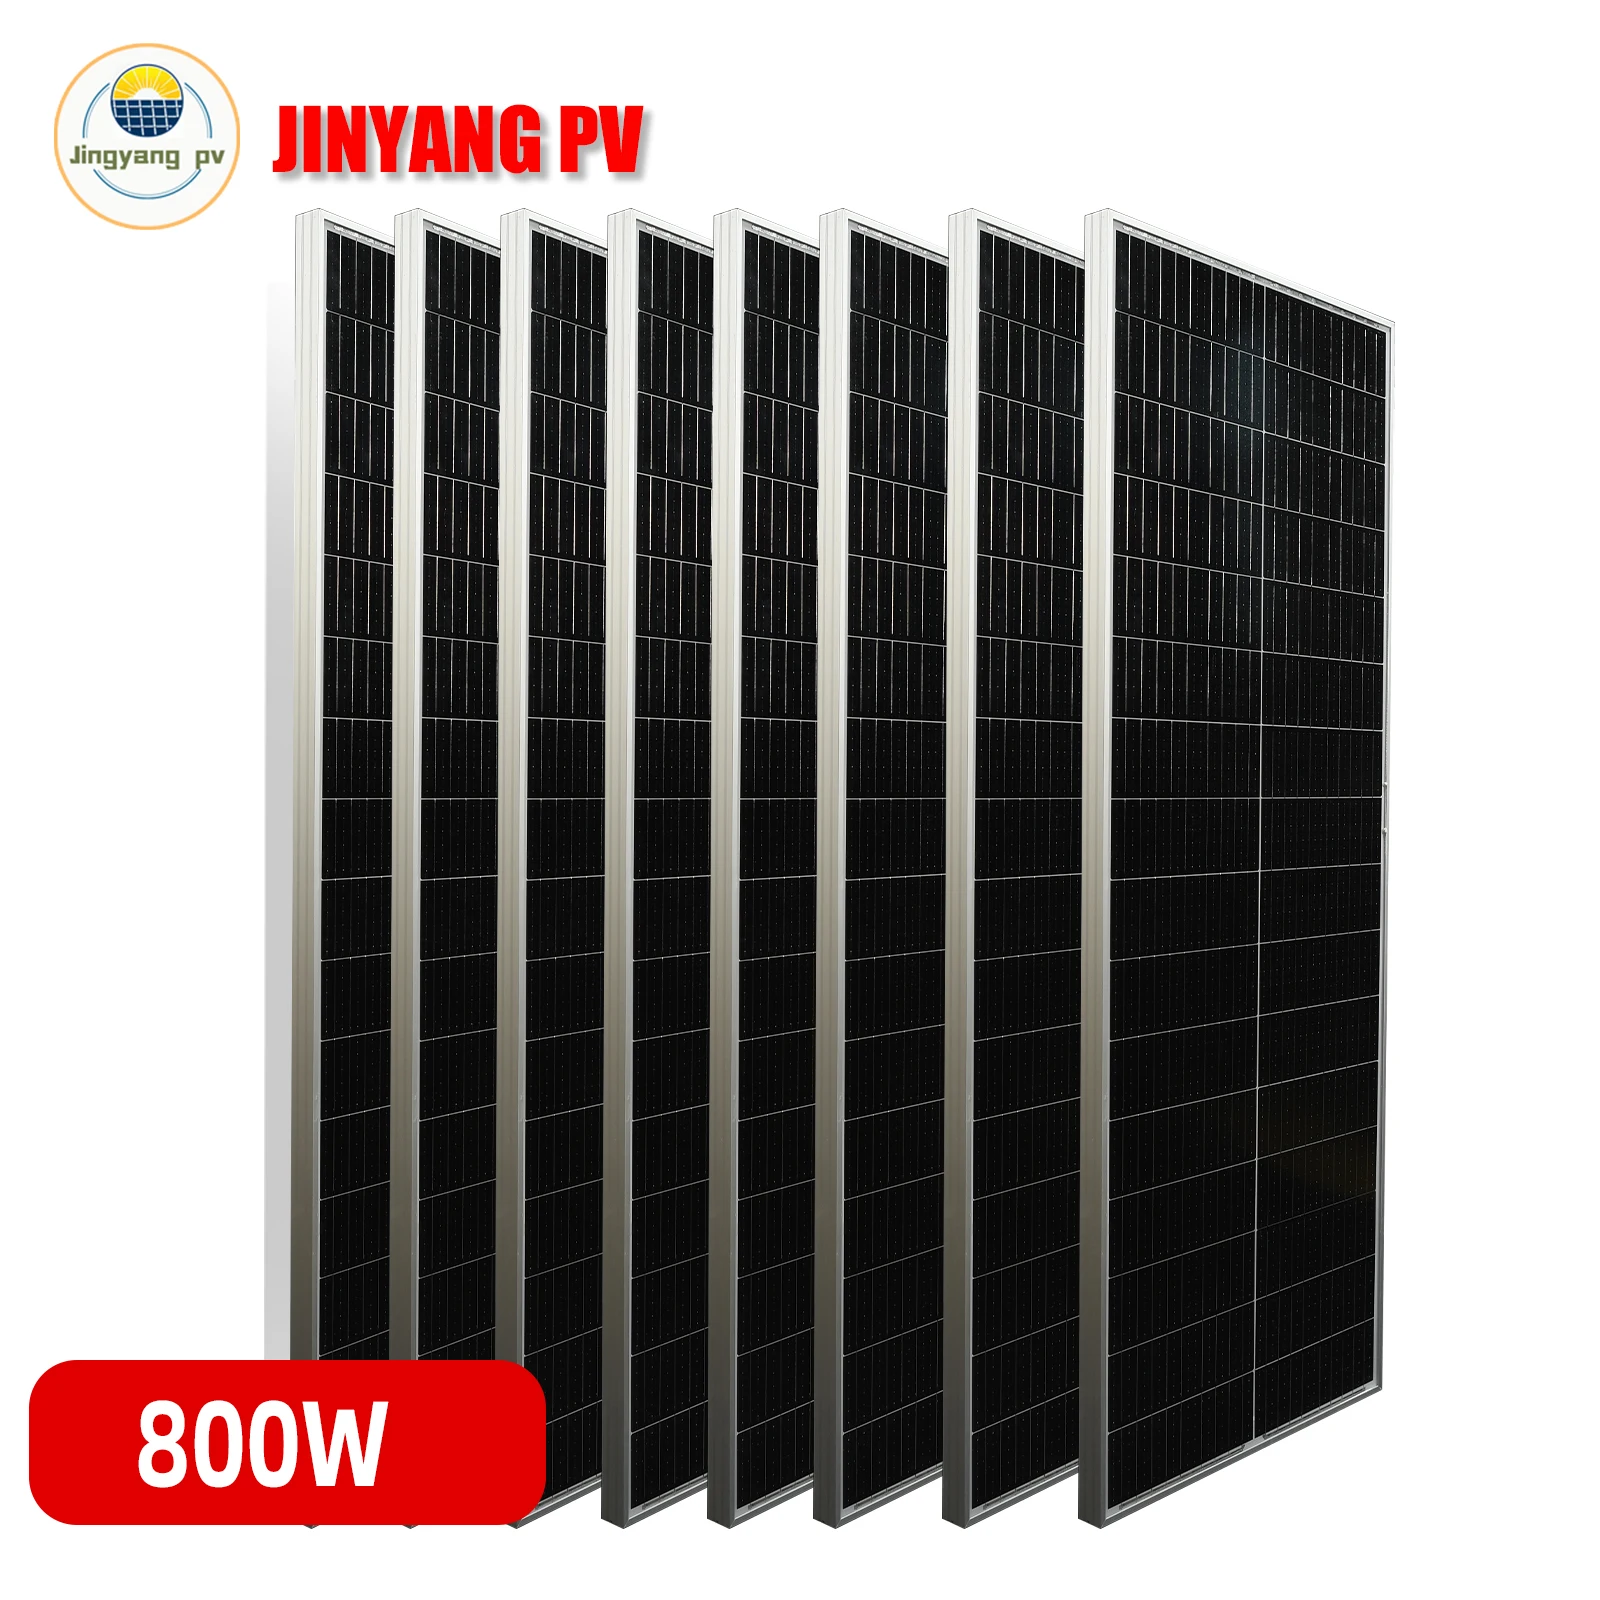 

800W 400W Rigid Solar Panel , Thickness 30mm ,18V Battery Charger 5 Years Warranty Rigid Solid Panel Solar For House